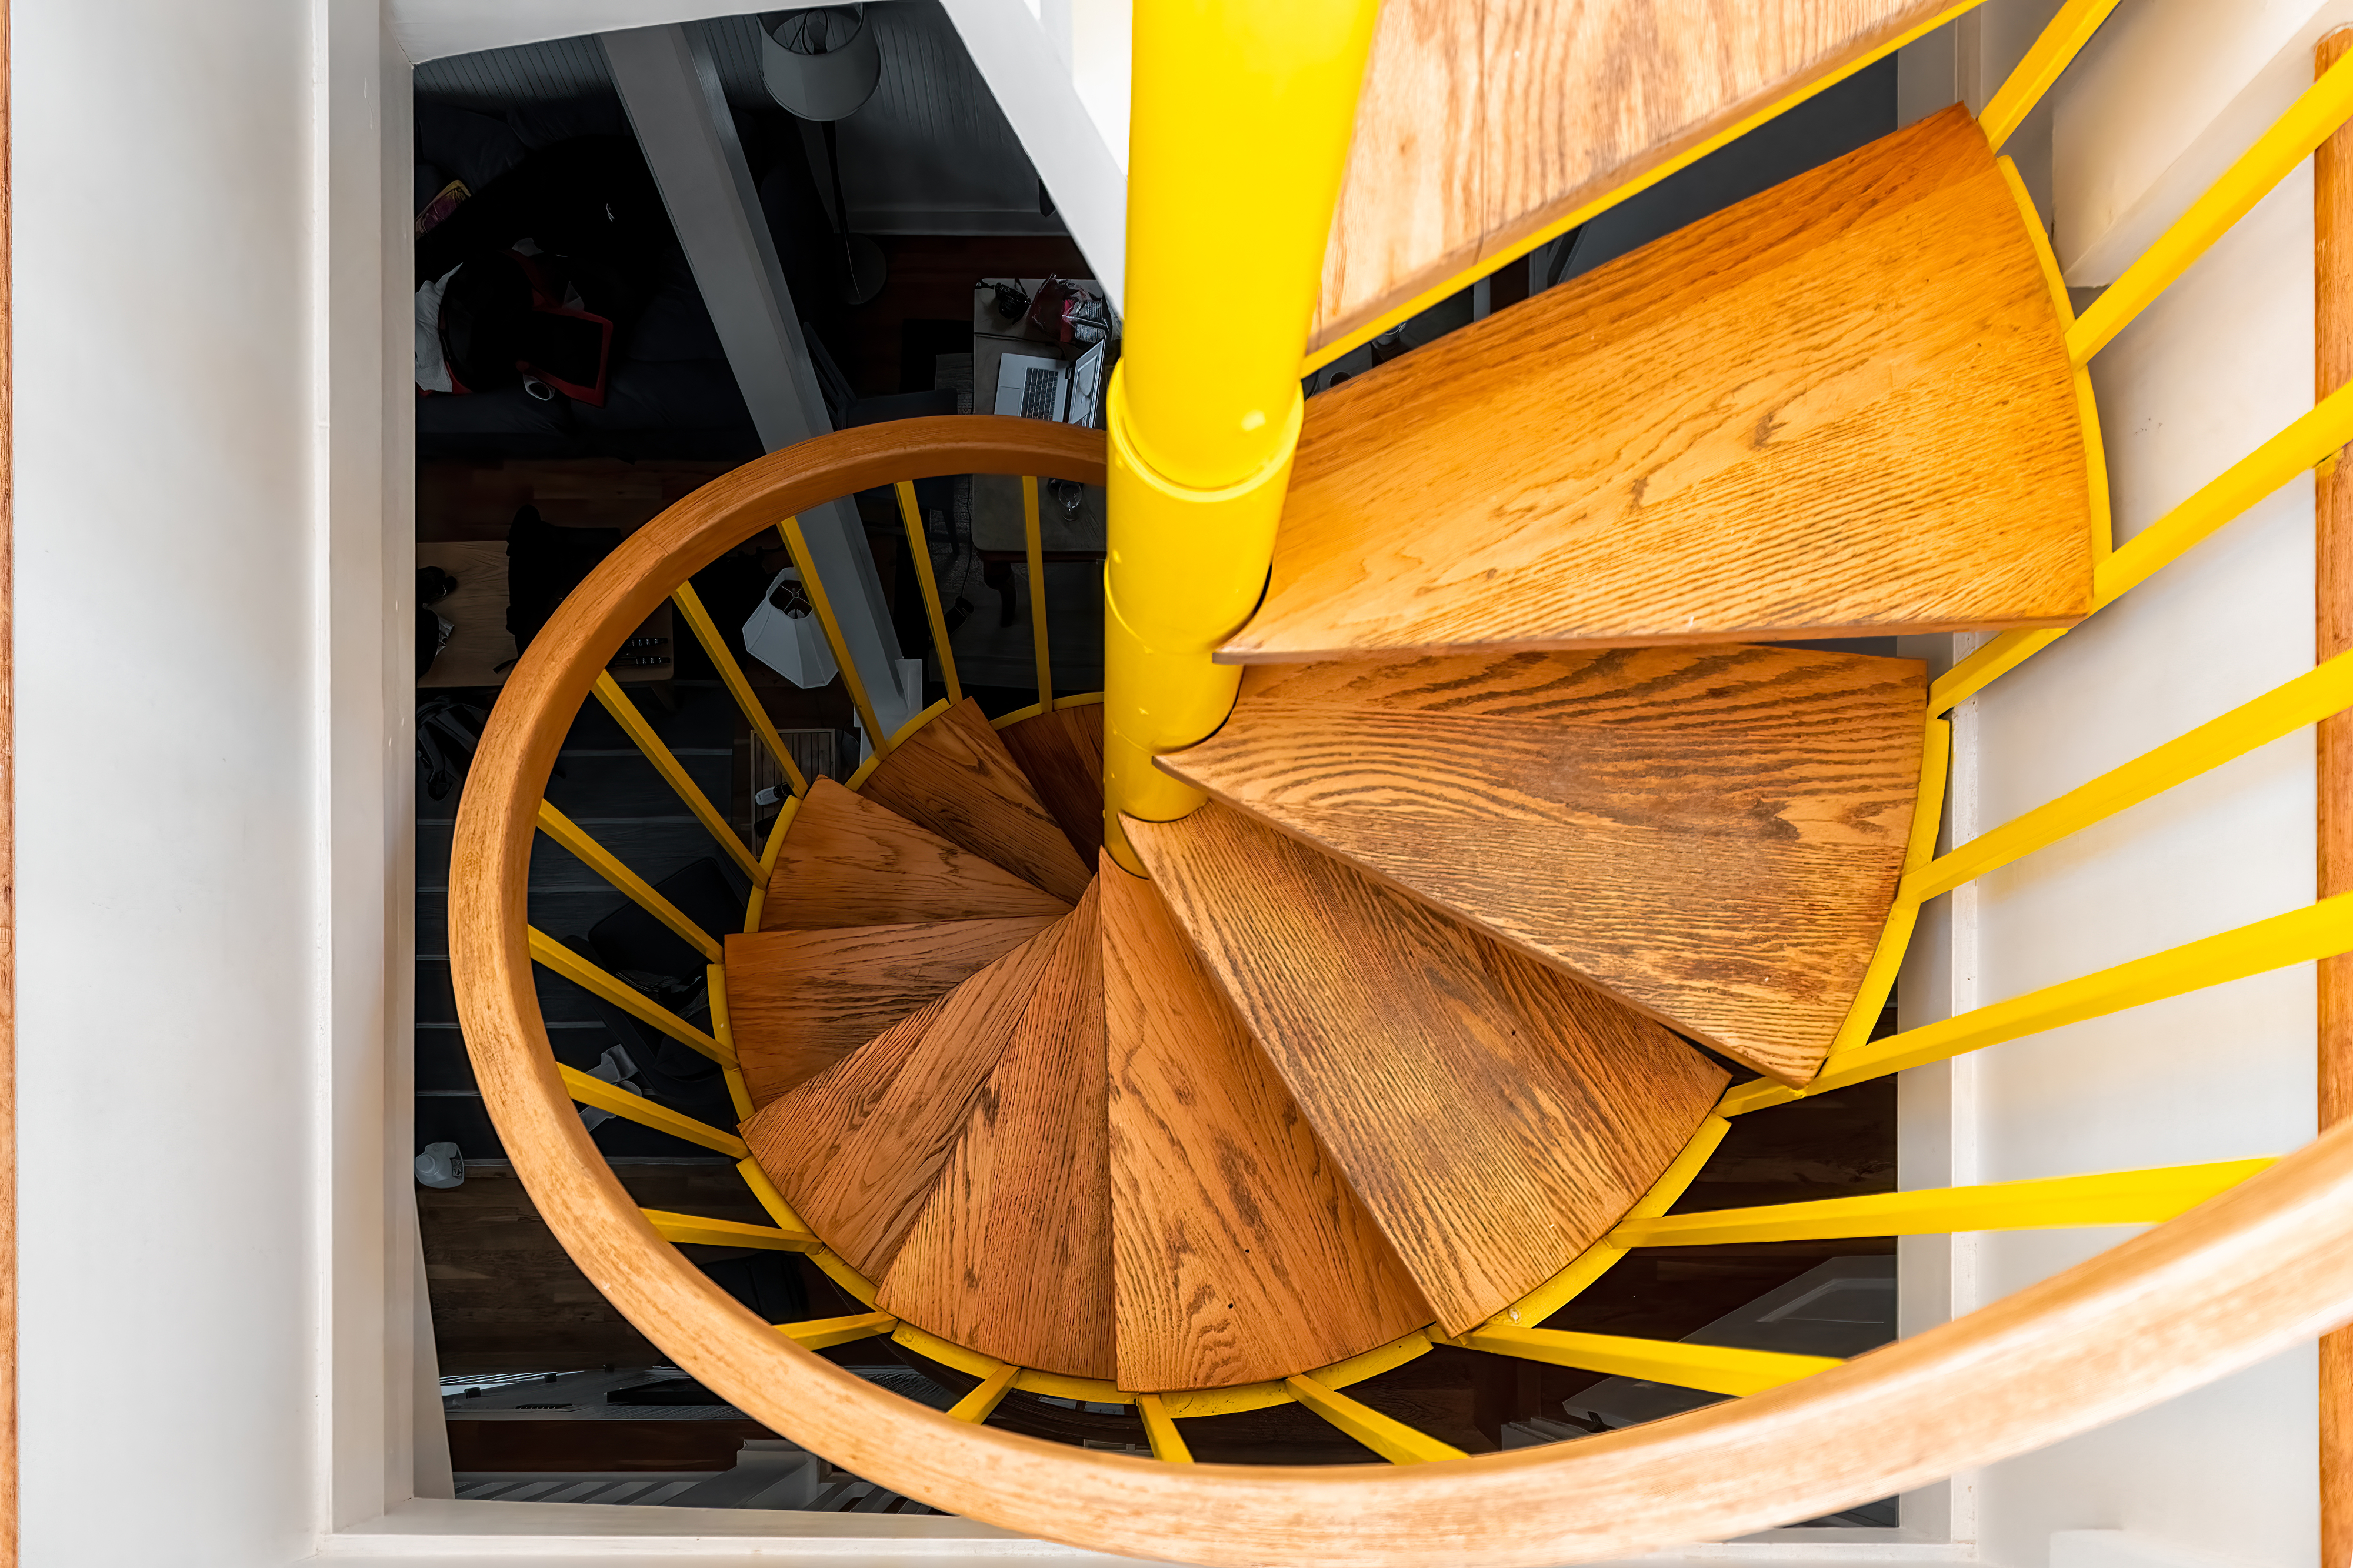 Spiral staircase with wooden steps and yellow central pole, viewed from above